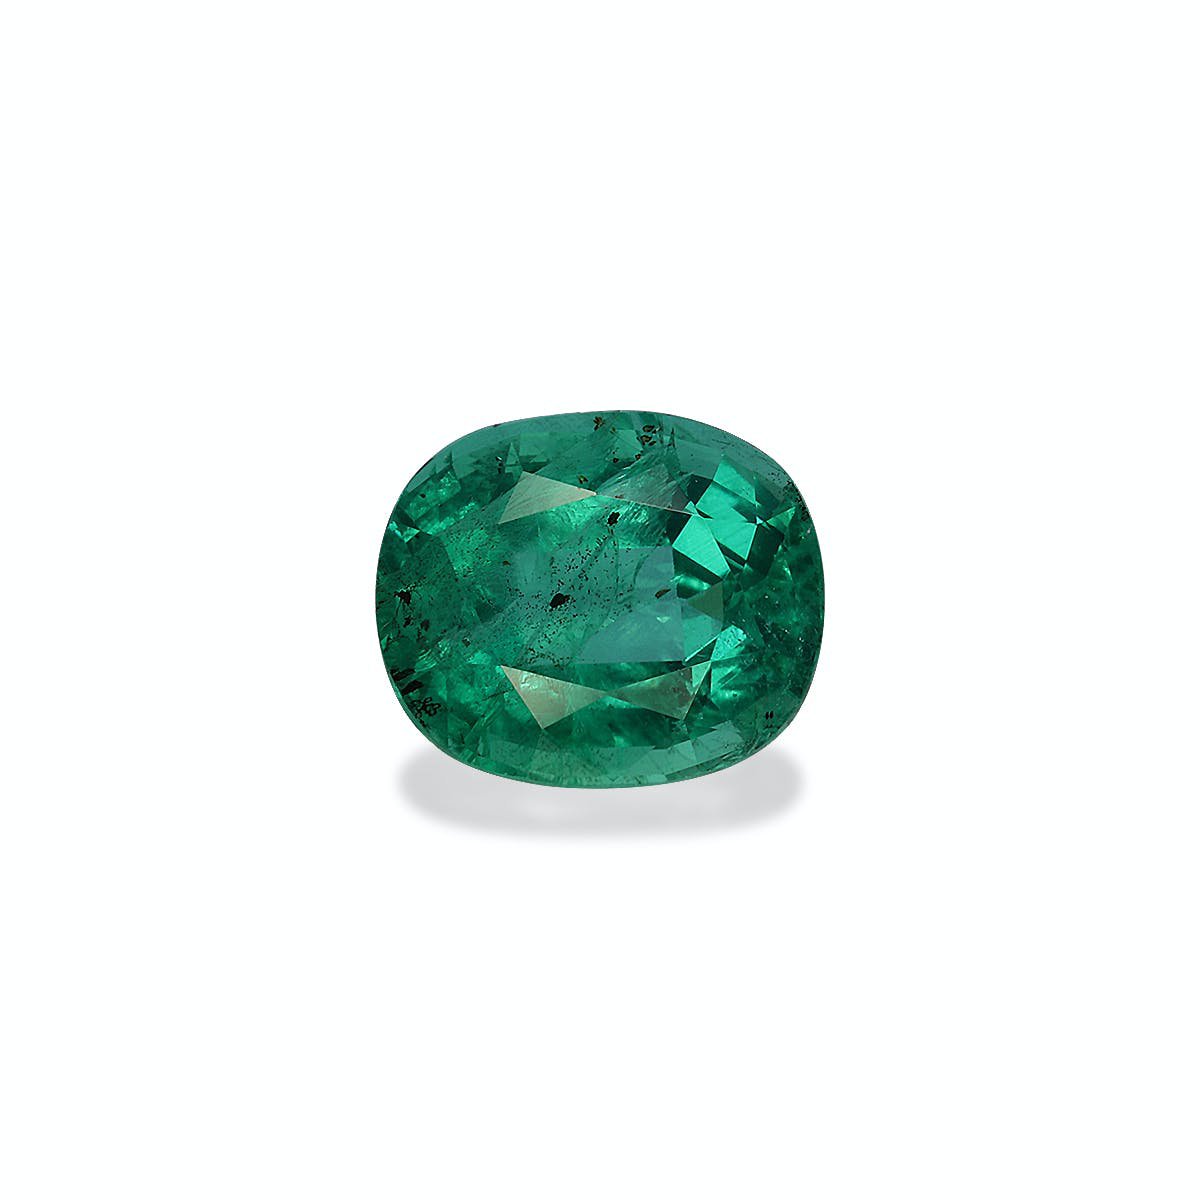 Picture of Green Zambian Emerald 1.67ct - 8x6mm (PG0342)